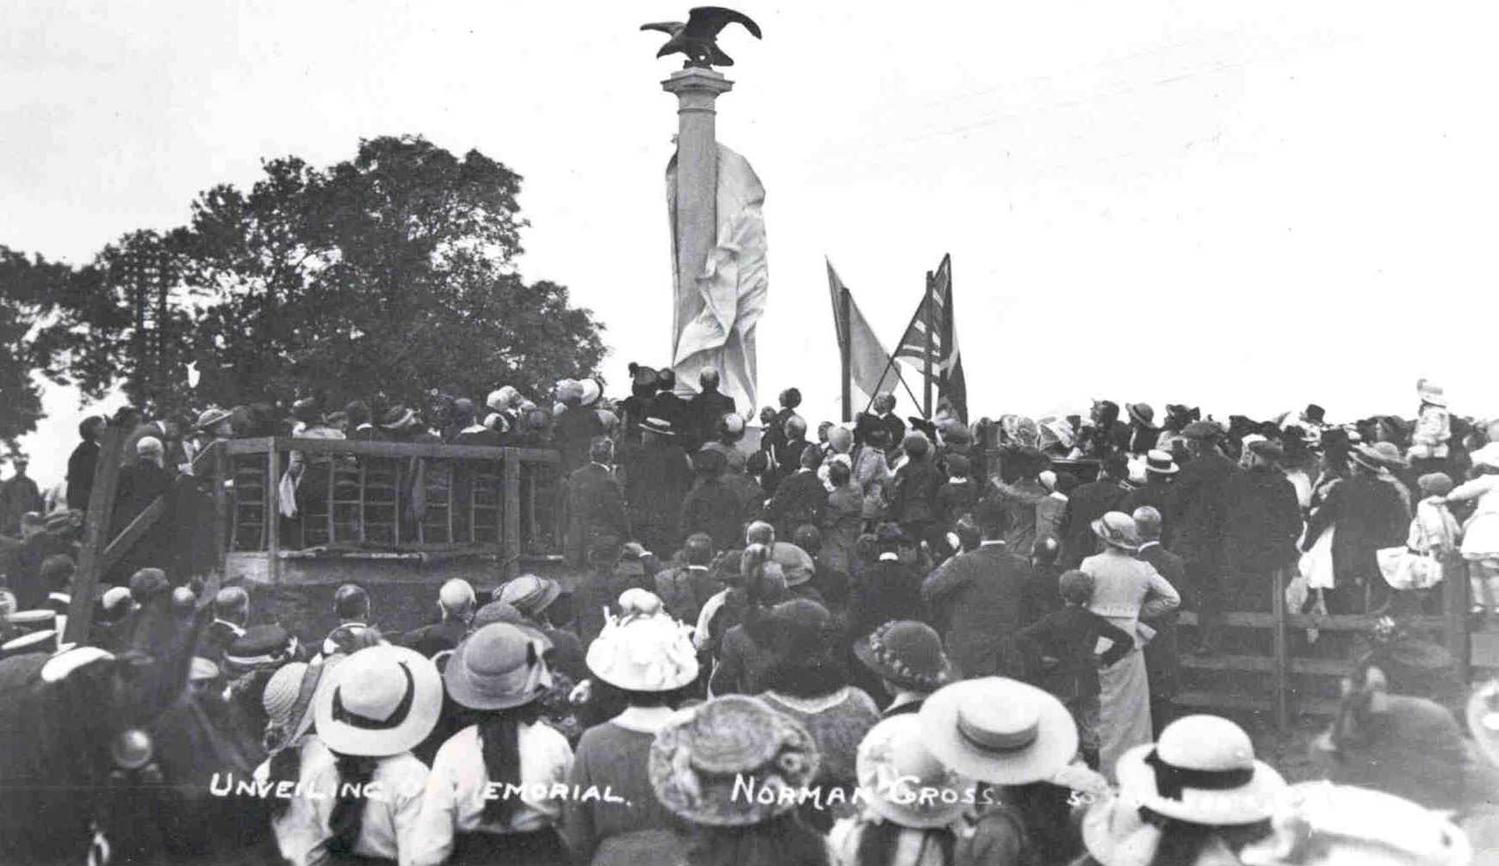 The Unveiling of the Norman Cross Memorial 28th of July 1914